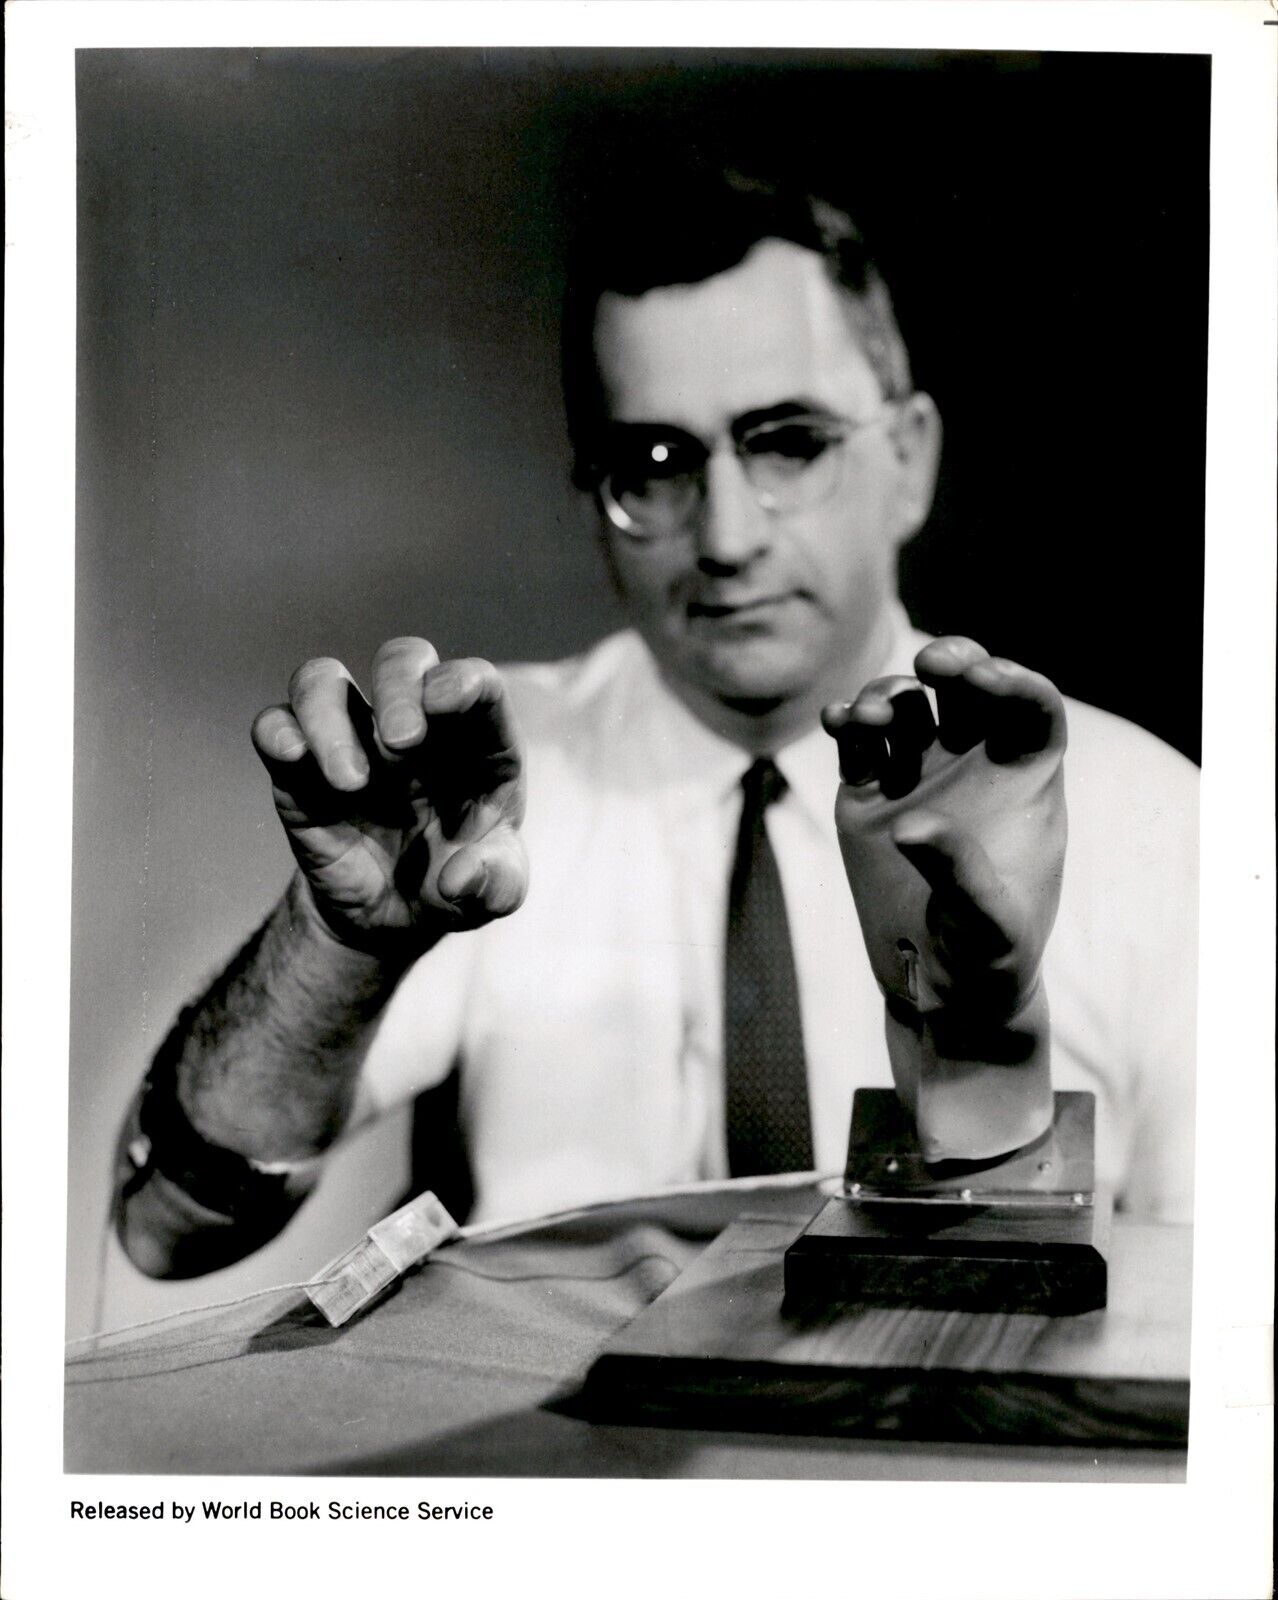 LD298 1969 Original Photo ARTIFICIAL HAND CONTROLLED BY AMPUTEE'S OWN MUSCLES